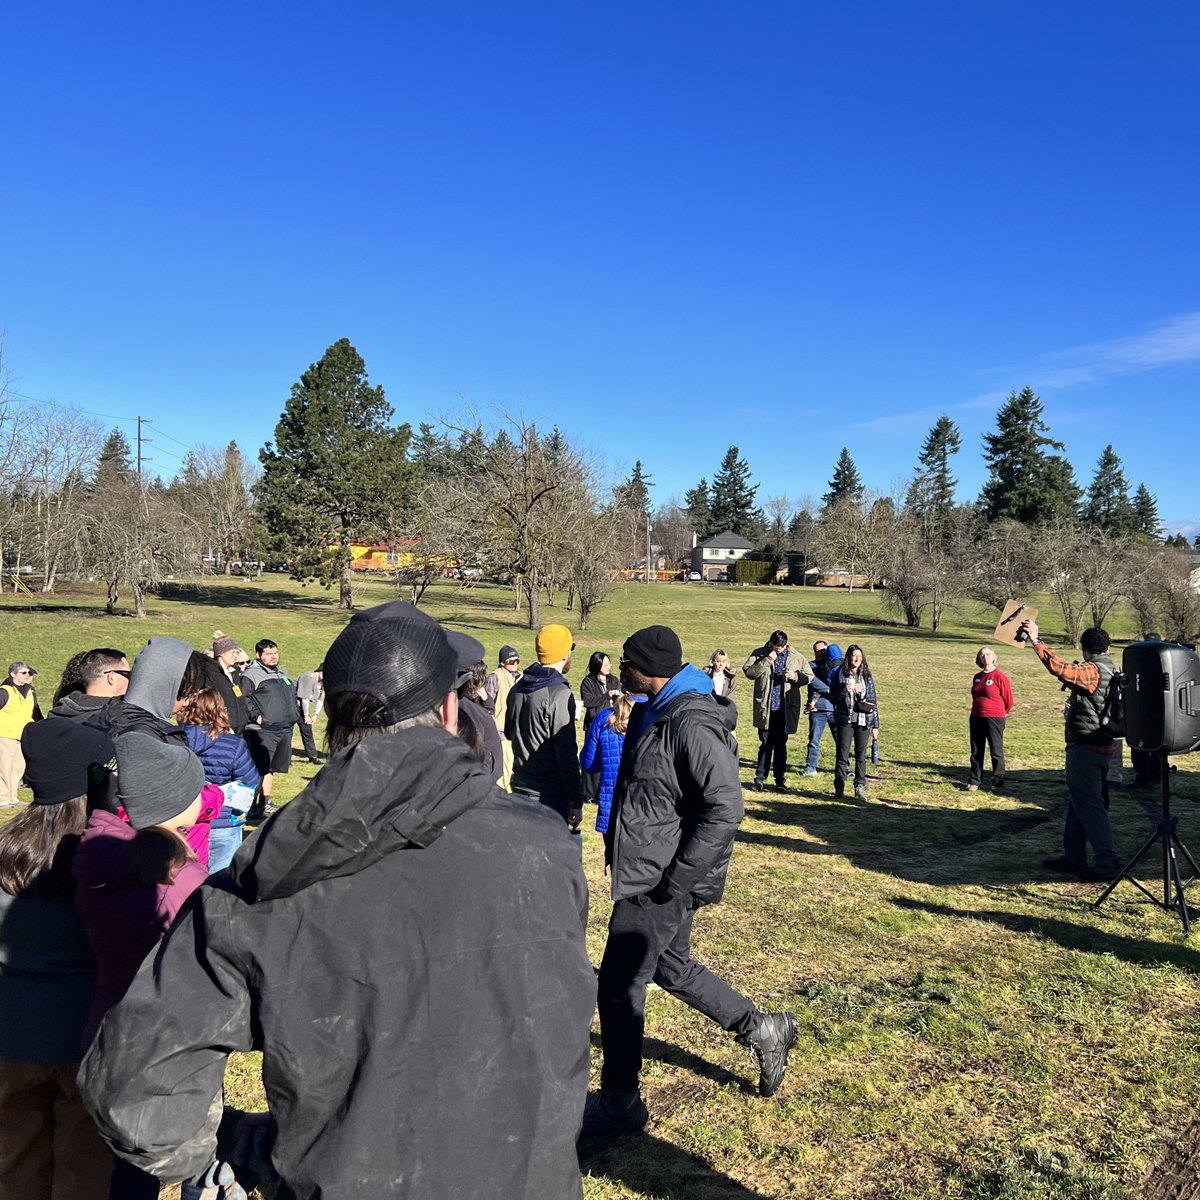 This Lunar New Year, OCAPIA celebrated by partnering with Portland Parks & Rec Urban Forestry team by planting trees in SE Portland’s Gates Park.

#LunarNewYear #PortlandParksAndRec #UrbanForestry #EnvironmentalJustice #OCAPIA